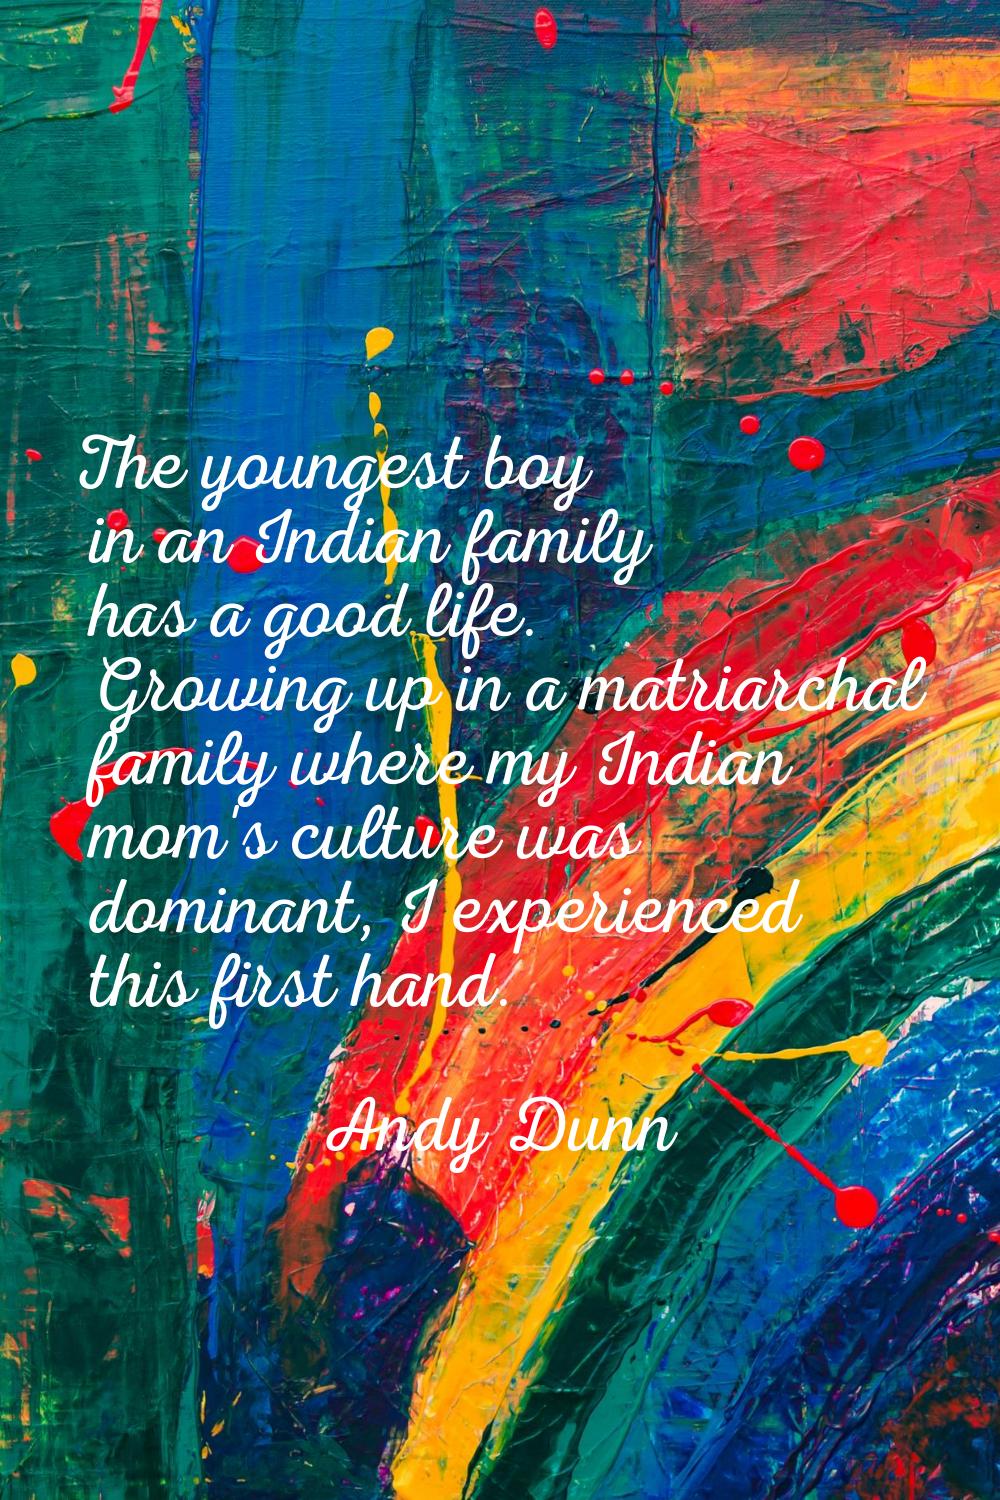 The youngest boy in an Indian family has a good life. Growing up in a matriarchal family where my I